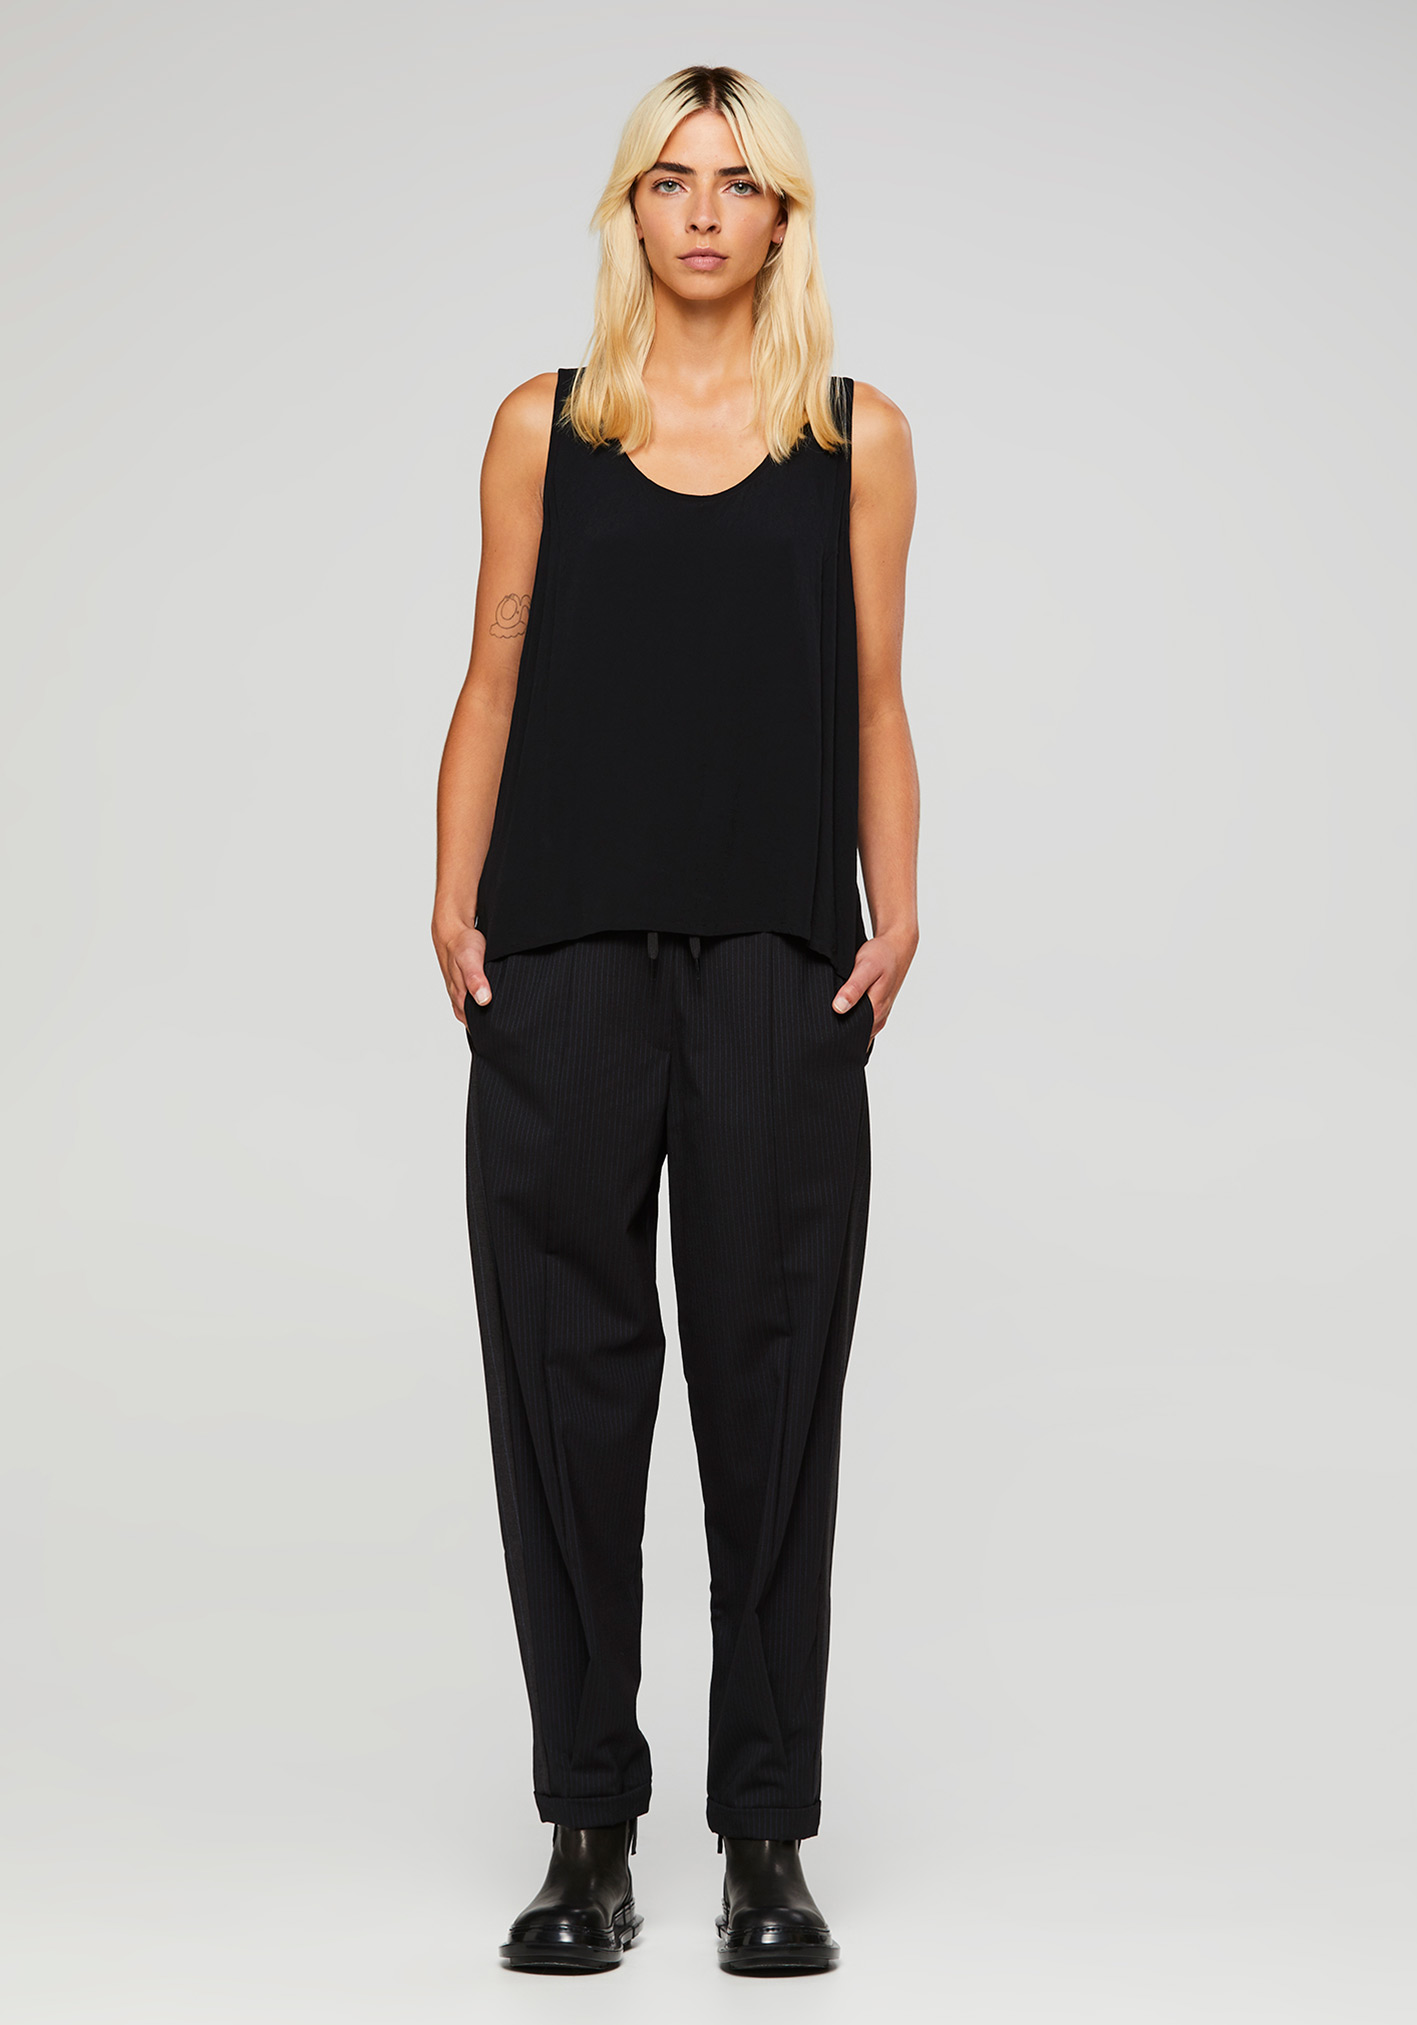 buy the latest Align Pant online